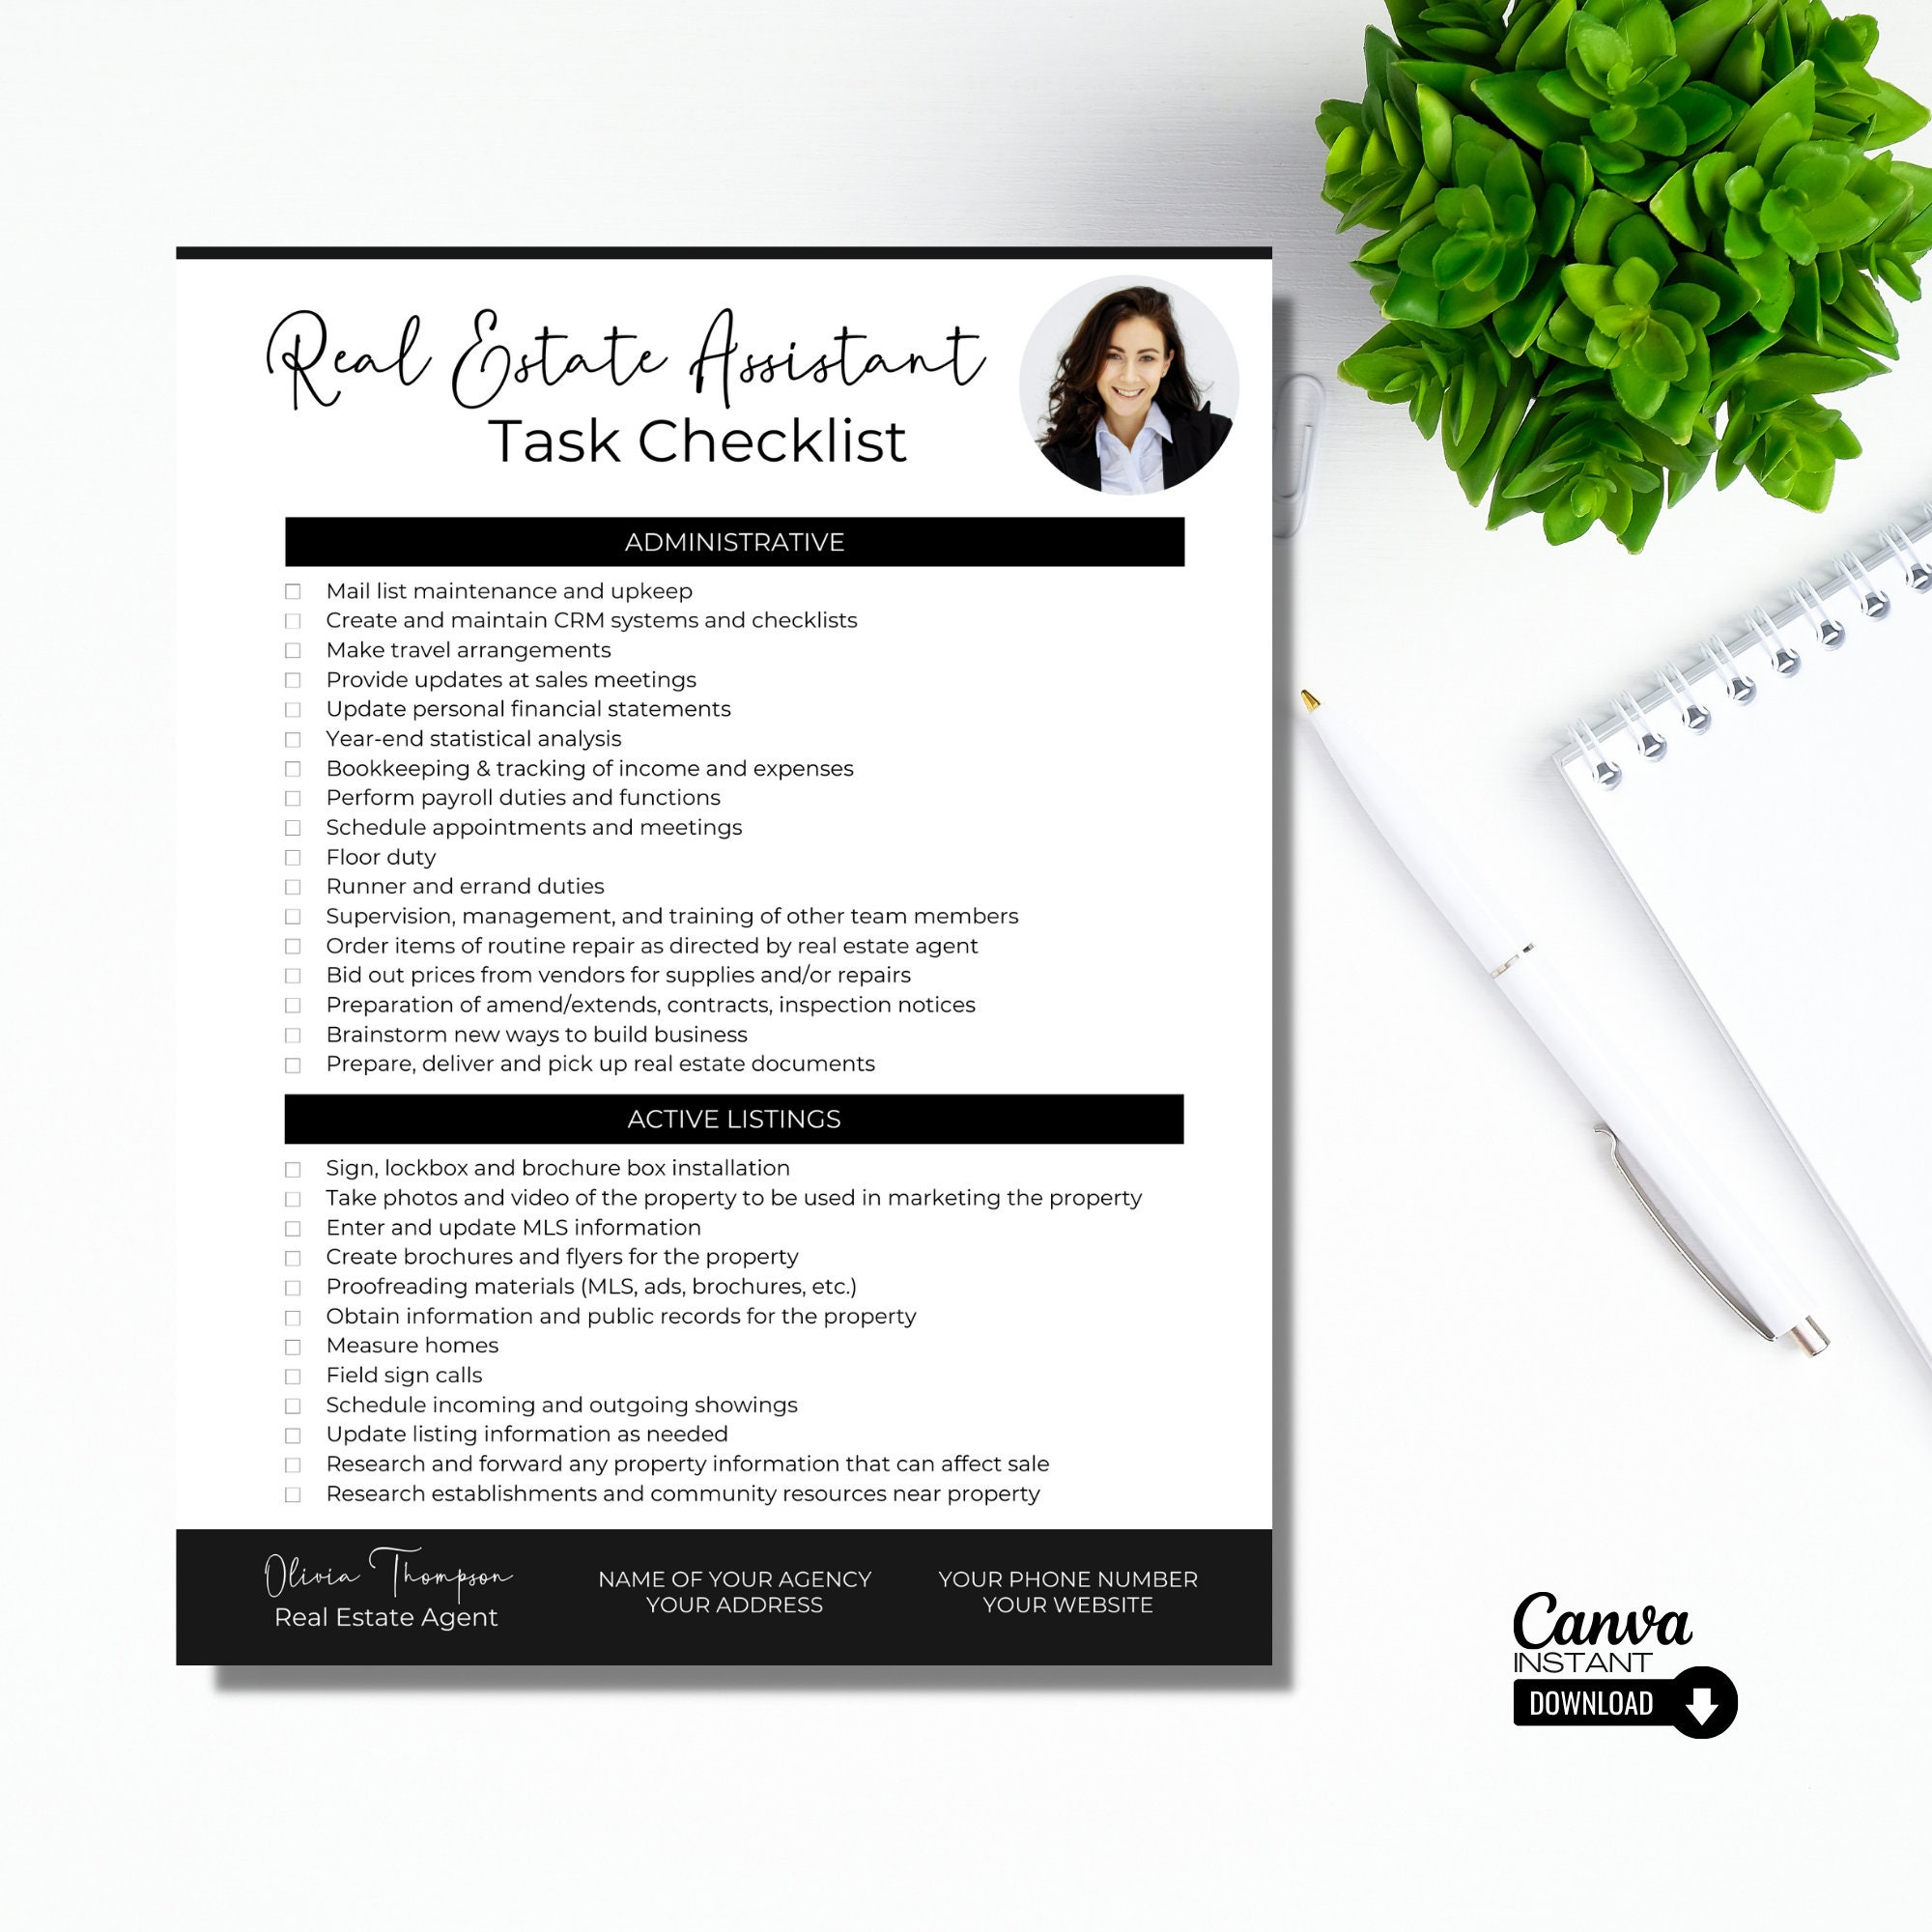 Real Estate Listing Checklist for Agents (+ Free Download)